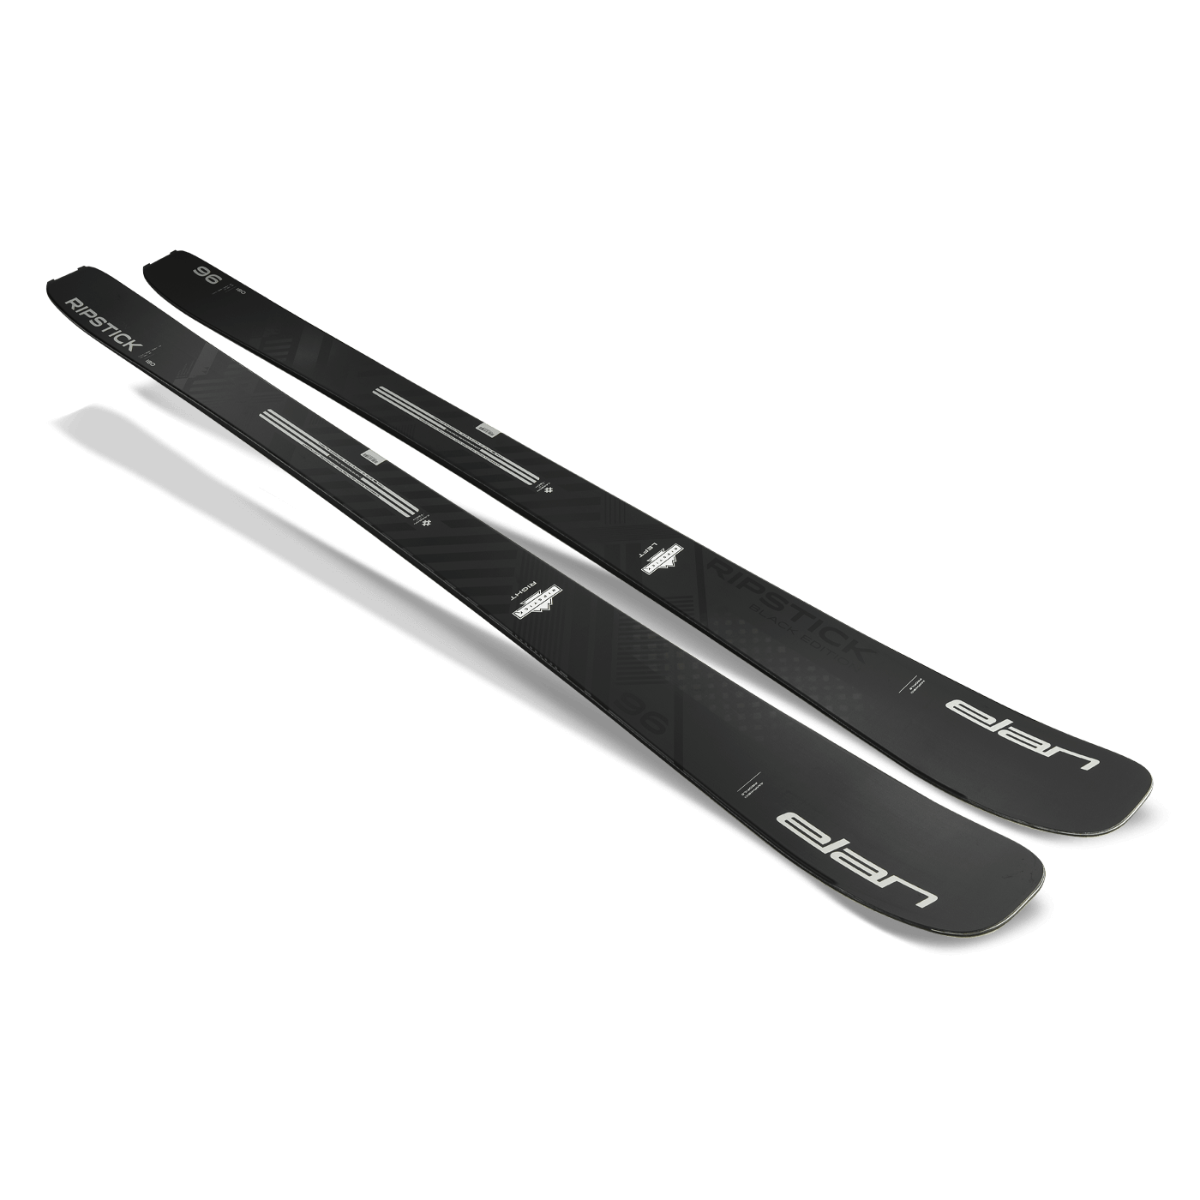 A perennial favorite of magazine testers and professional skiers alike and known for its stable, powerful feel, the new Ripstick 96 Black Edition is ready to over-deliver on their promise to skiers looking for the ultimate, all-condition freeride ski.